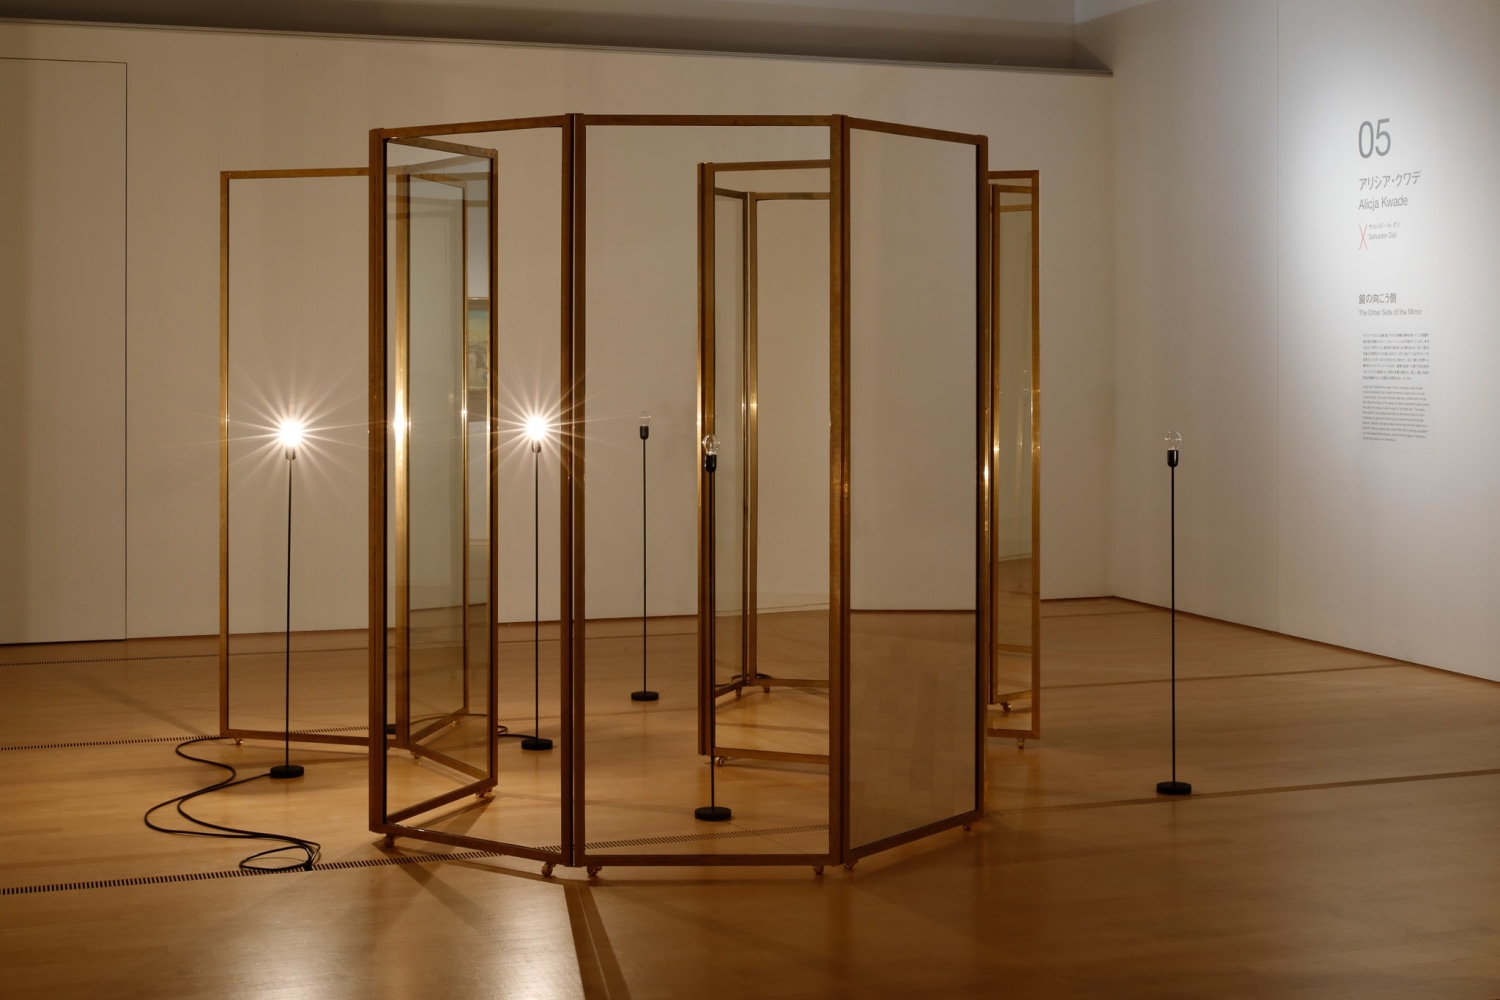 Alicja Kwade

Between Glances

2018

Brass, glass, mirror, lamps

7 ft 3 inches x 12 ft 5 inches x 5 ft 9 inches (220 x 378 x 176 cm)

Installed dimensions variable

AKW 537

&amp;euro;115,000

&amp;nbsp;

INQUIRE

&amp;nbsp;

Installation view: Syncopation: Contemporary encounters with the Modern Masters, Pola Museum of Art, 2019.&amp;nbsp;Photo: Keizo Kiok